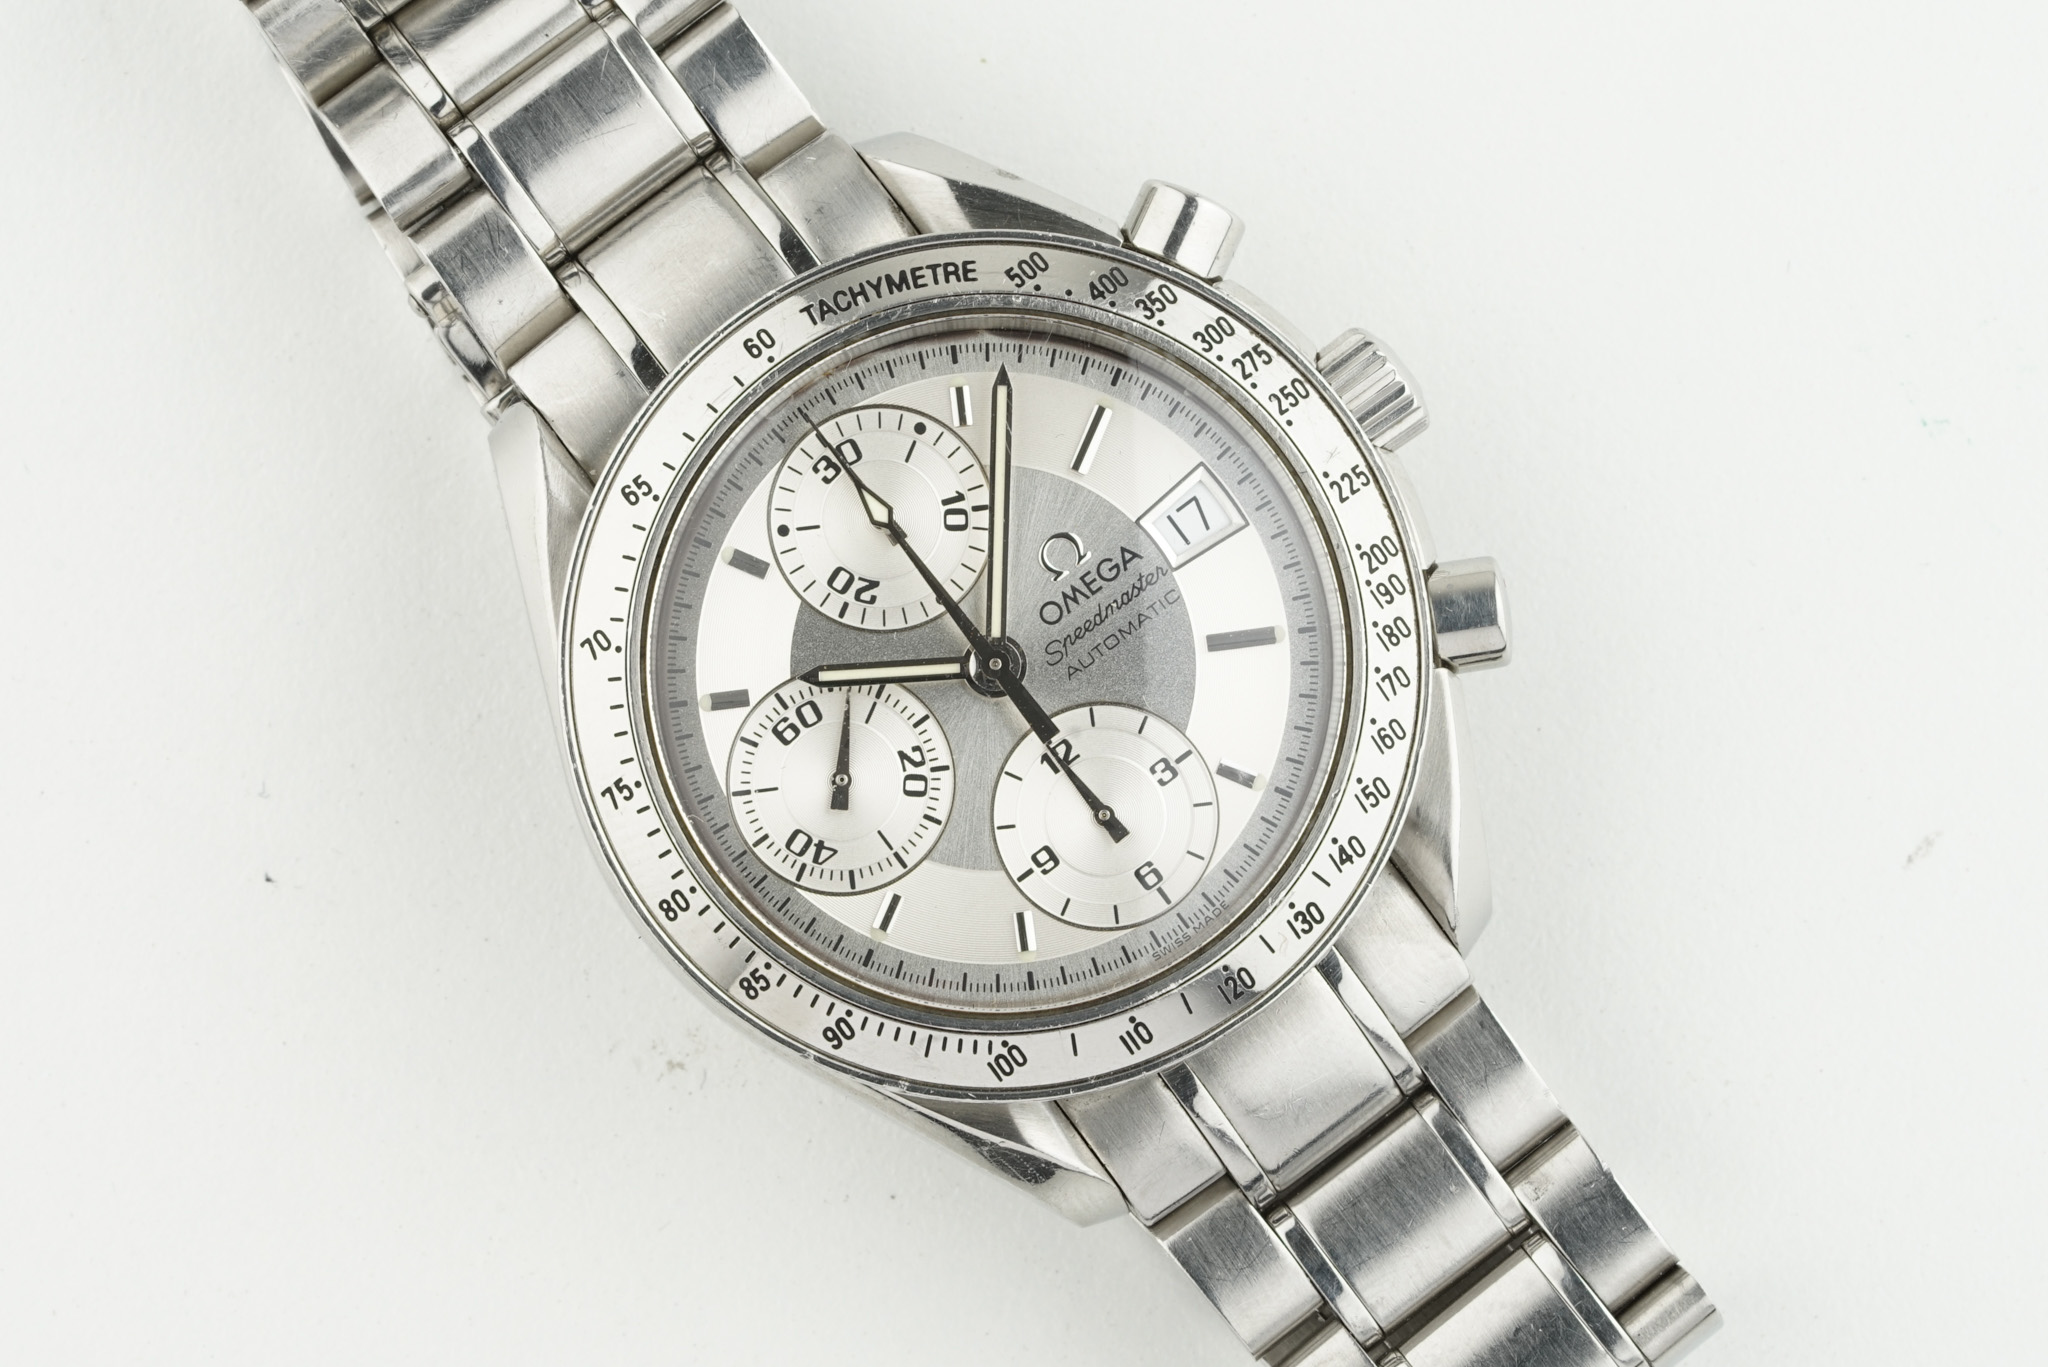 OMEGA SPEEDMASTER DATE AUTOMATIC CHRONOGRAPH, circular silver dial with stick hour markers and